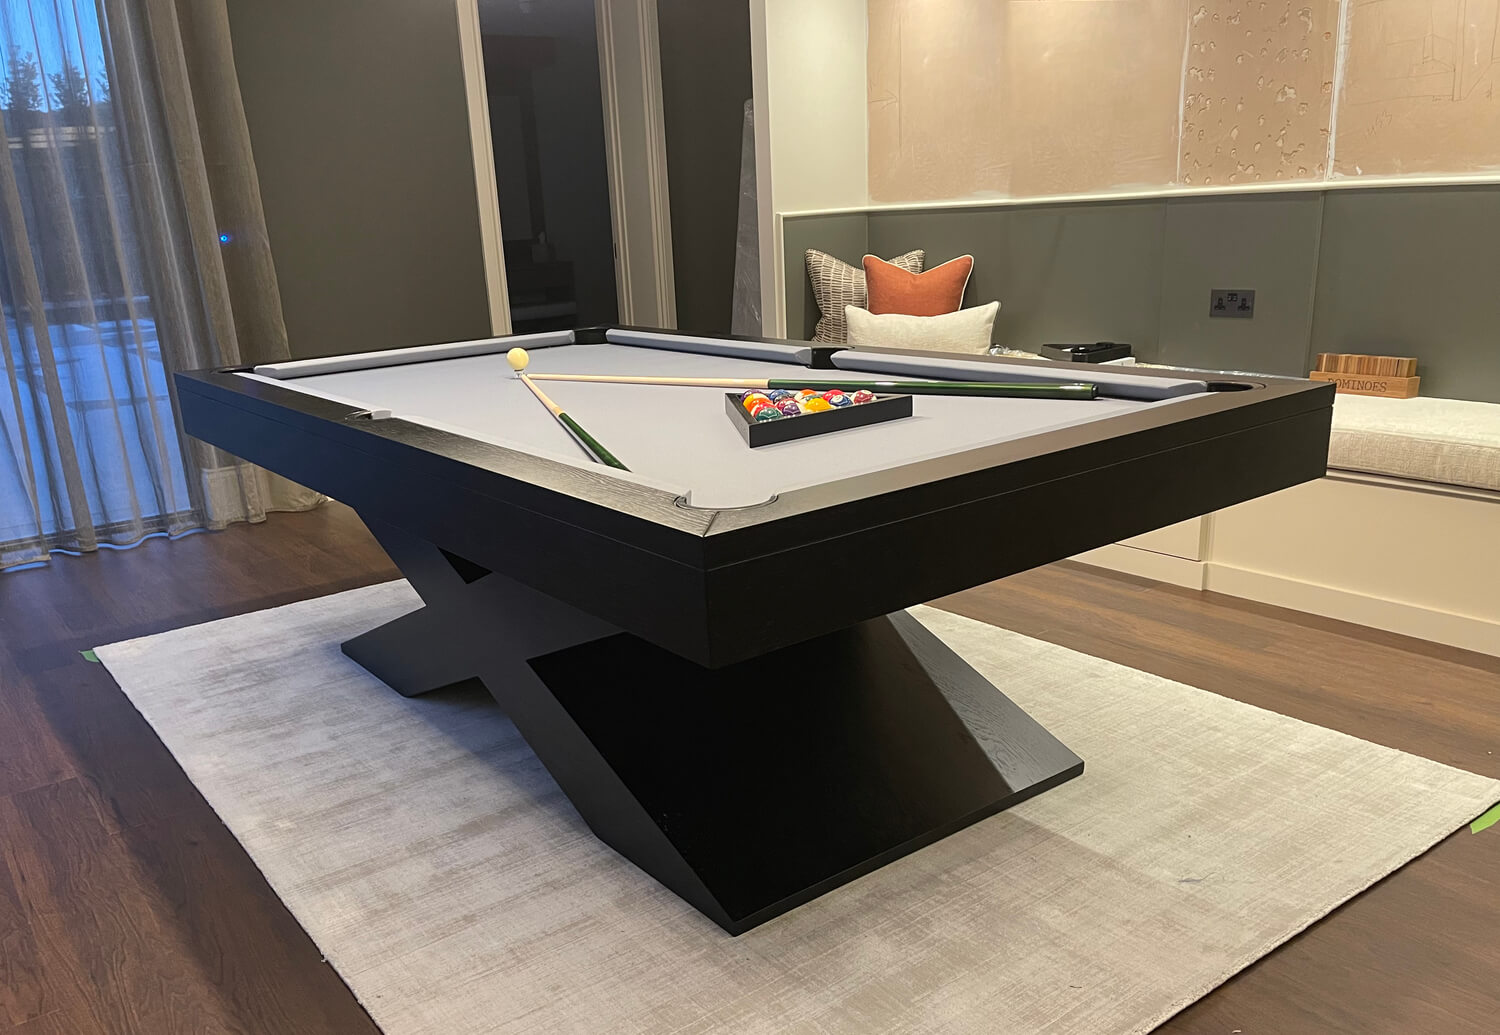 The Xtreme Slate Bed Pool Table | Liberty Games